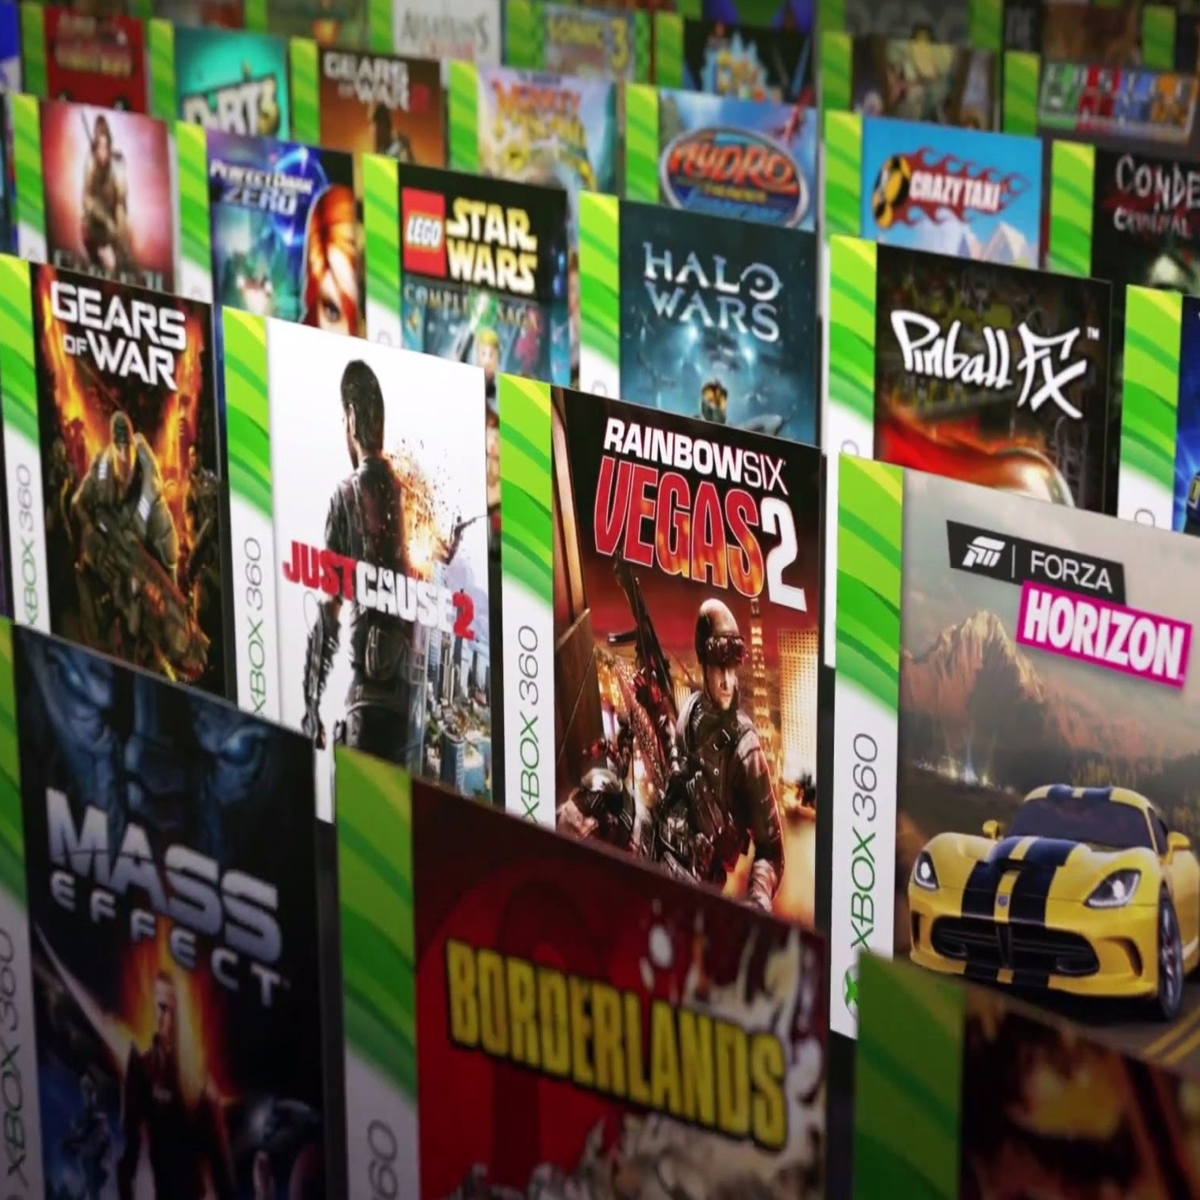 Xbox One games announced at E3 (pictures) - CNET